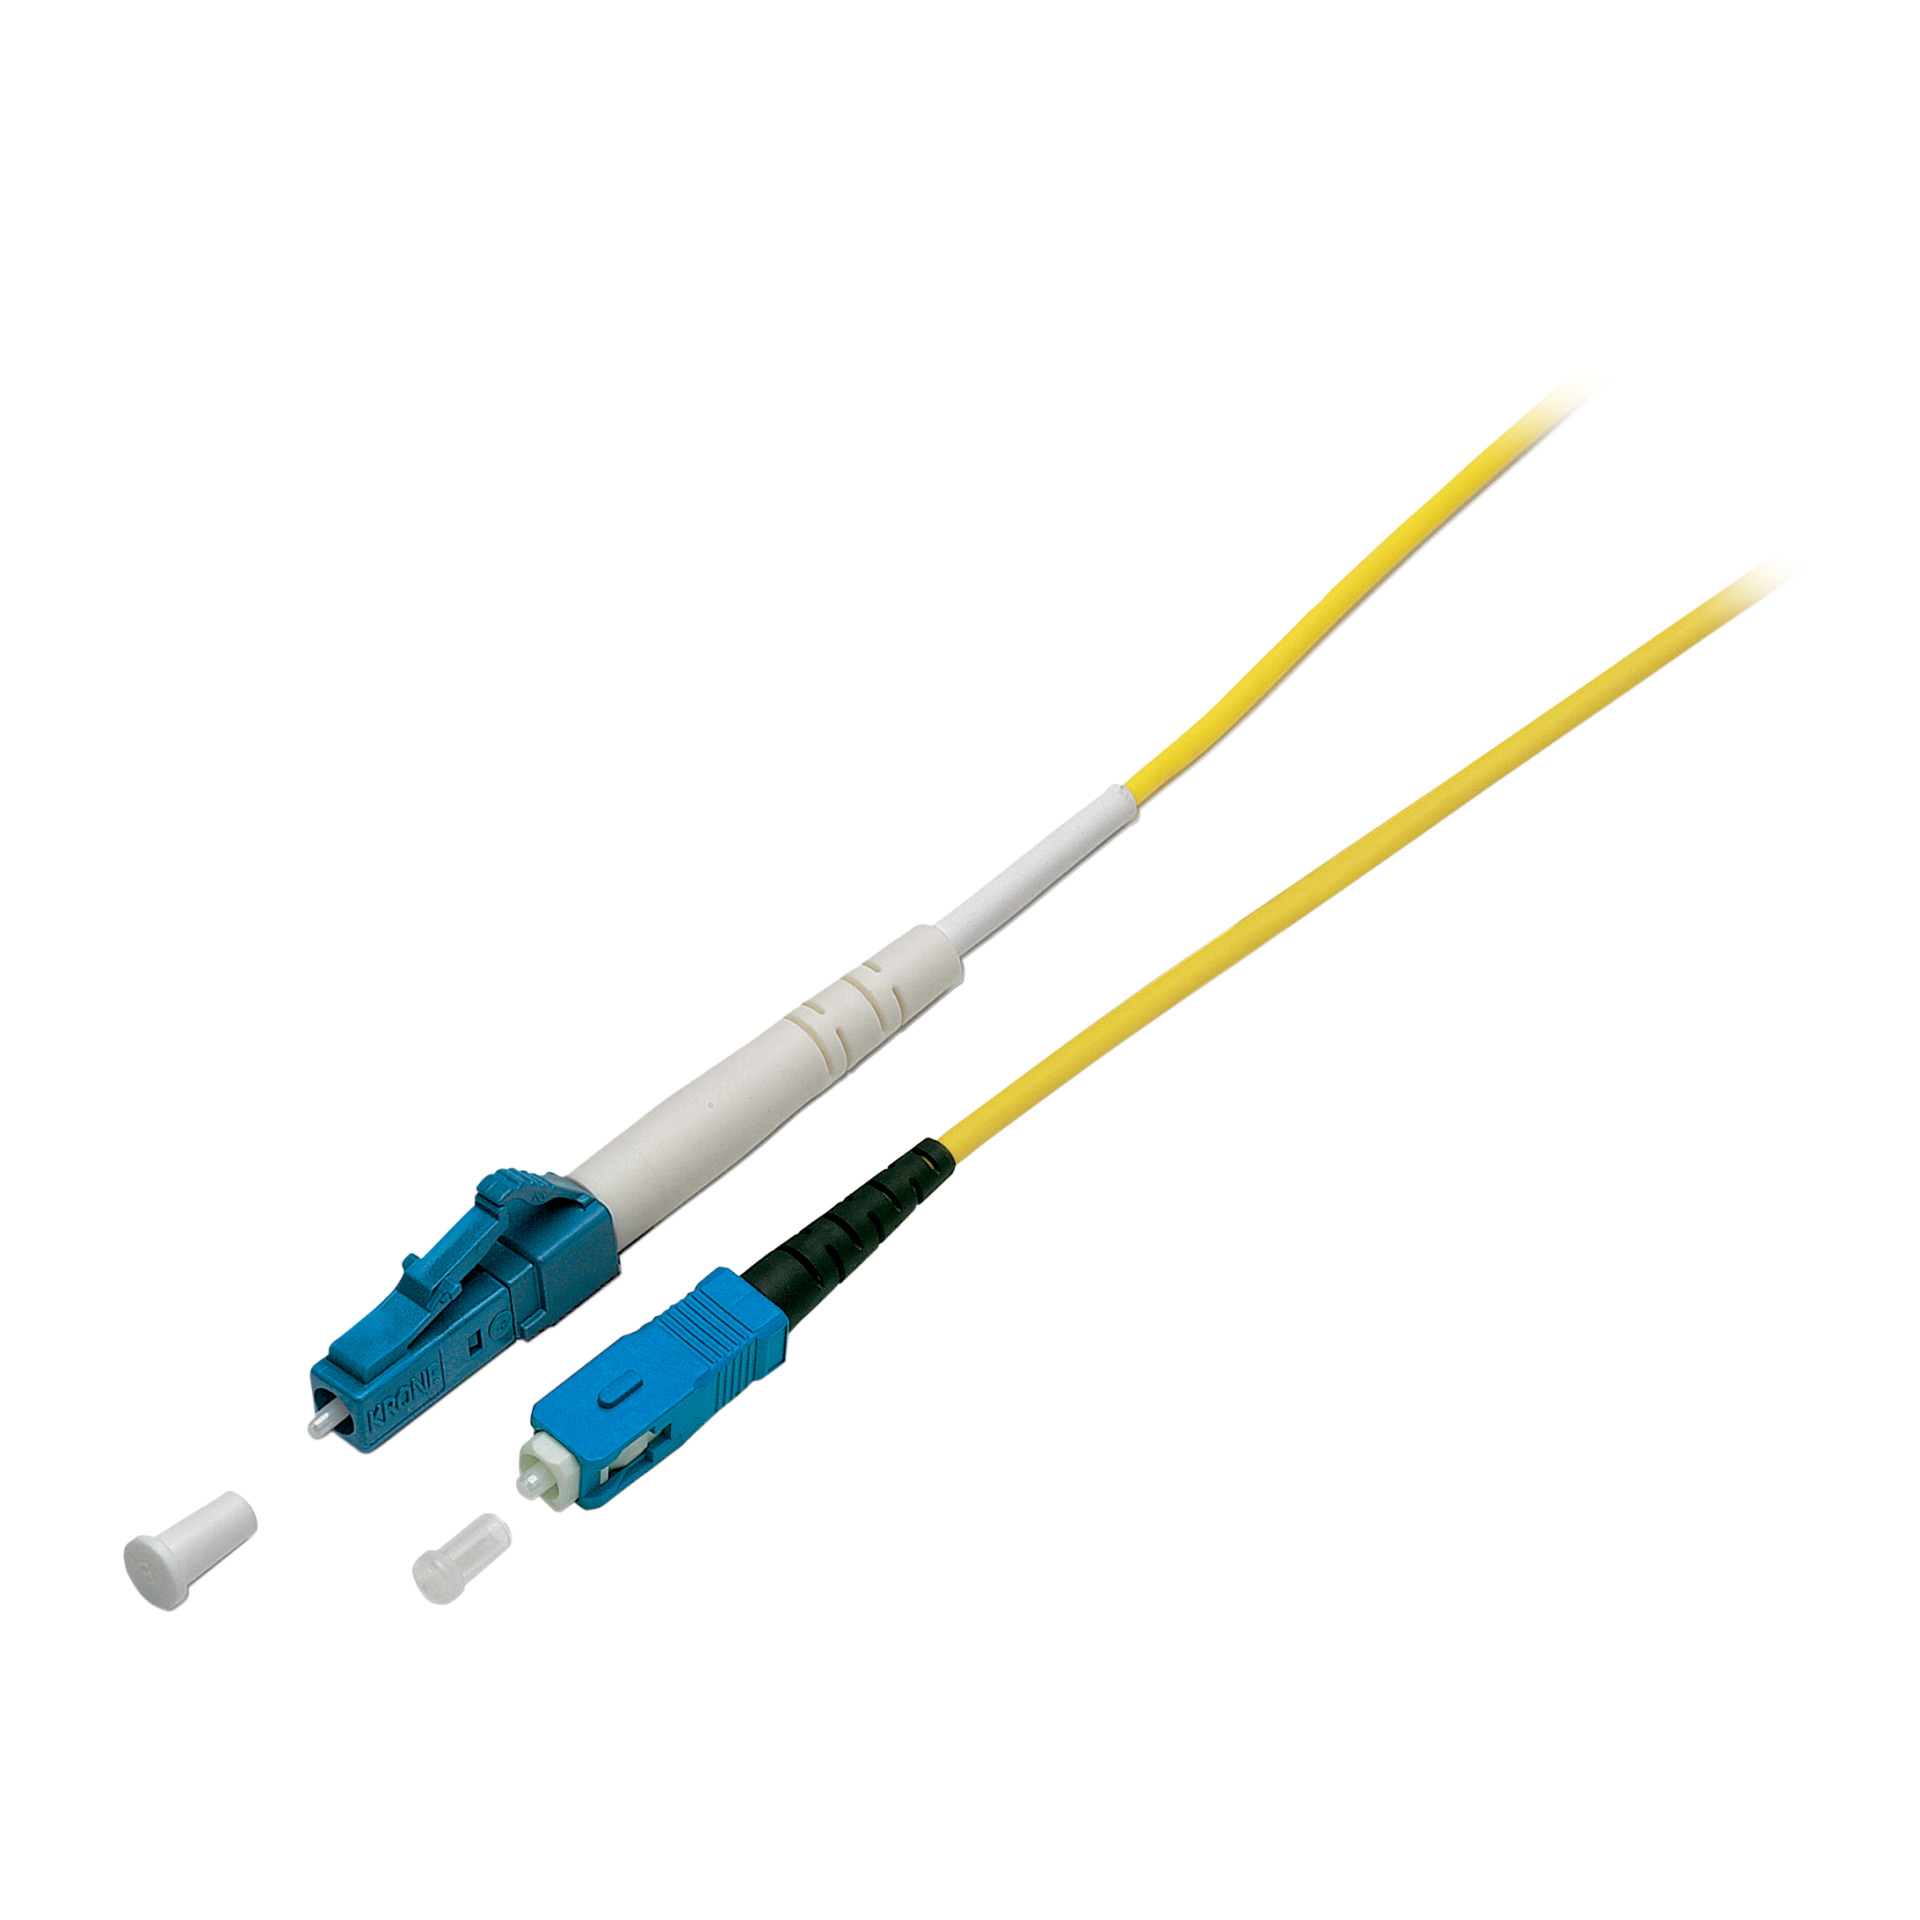 Simplex FO Patch Cable LC-SC G657.A2 15m 2,0mm yellow 9/125µm